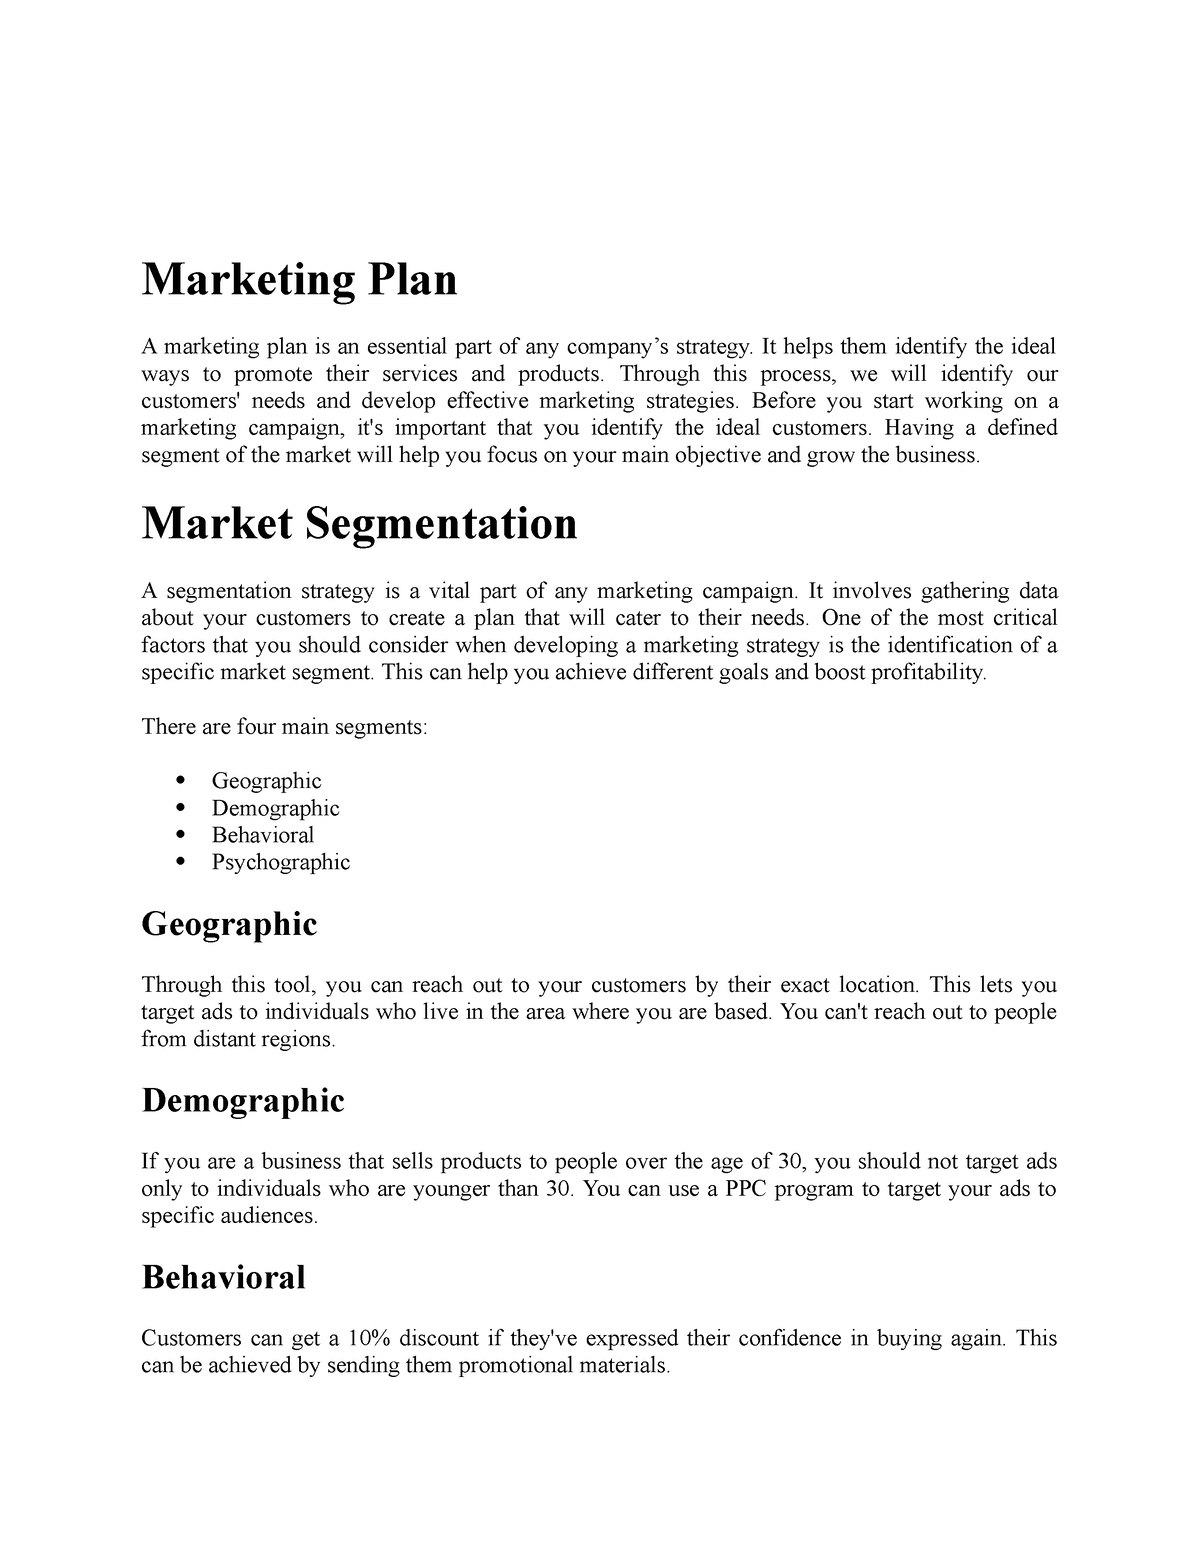 marketing plan assignment example